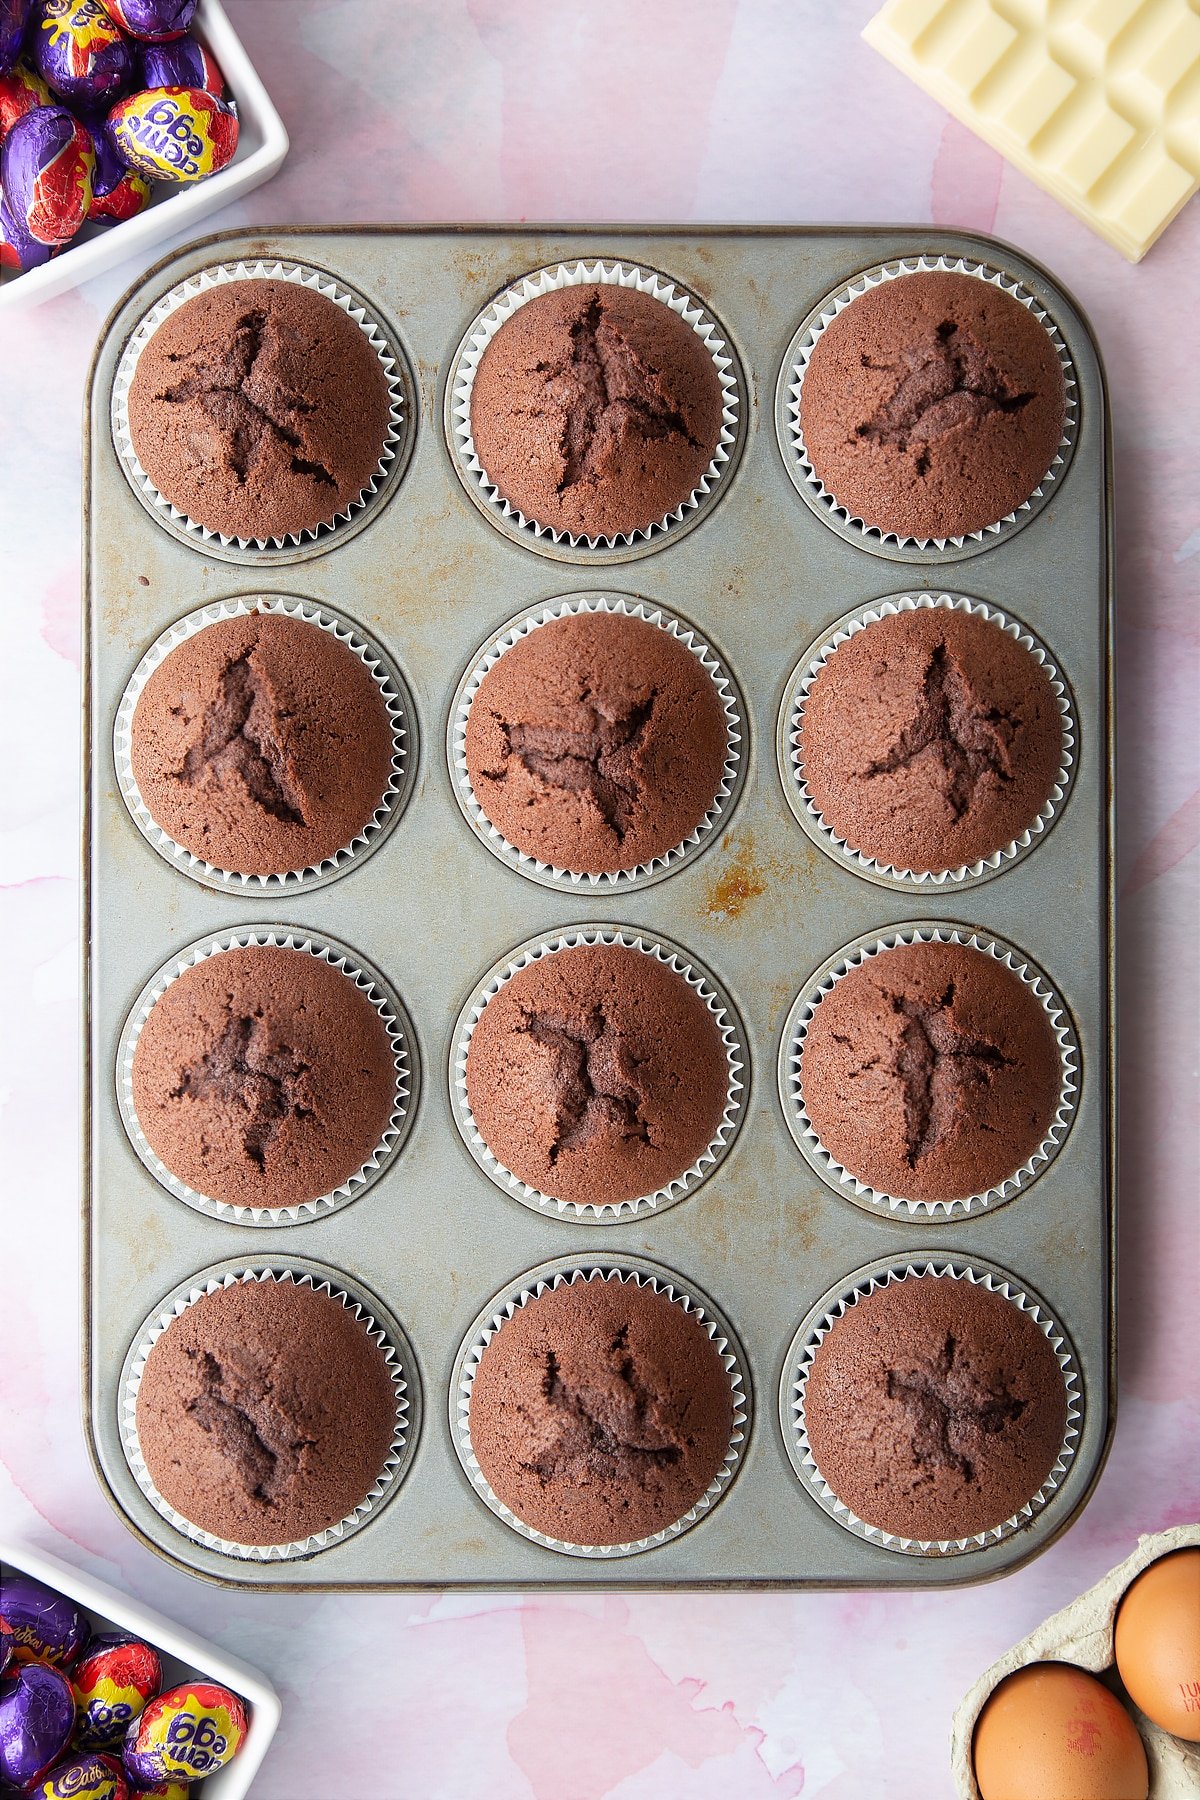 Chocolate cupcakes in a 12 hole muffin tray. Ingredients to make Cadbury Creme Egg cakes surround the tray.